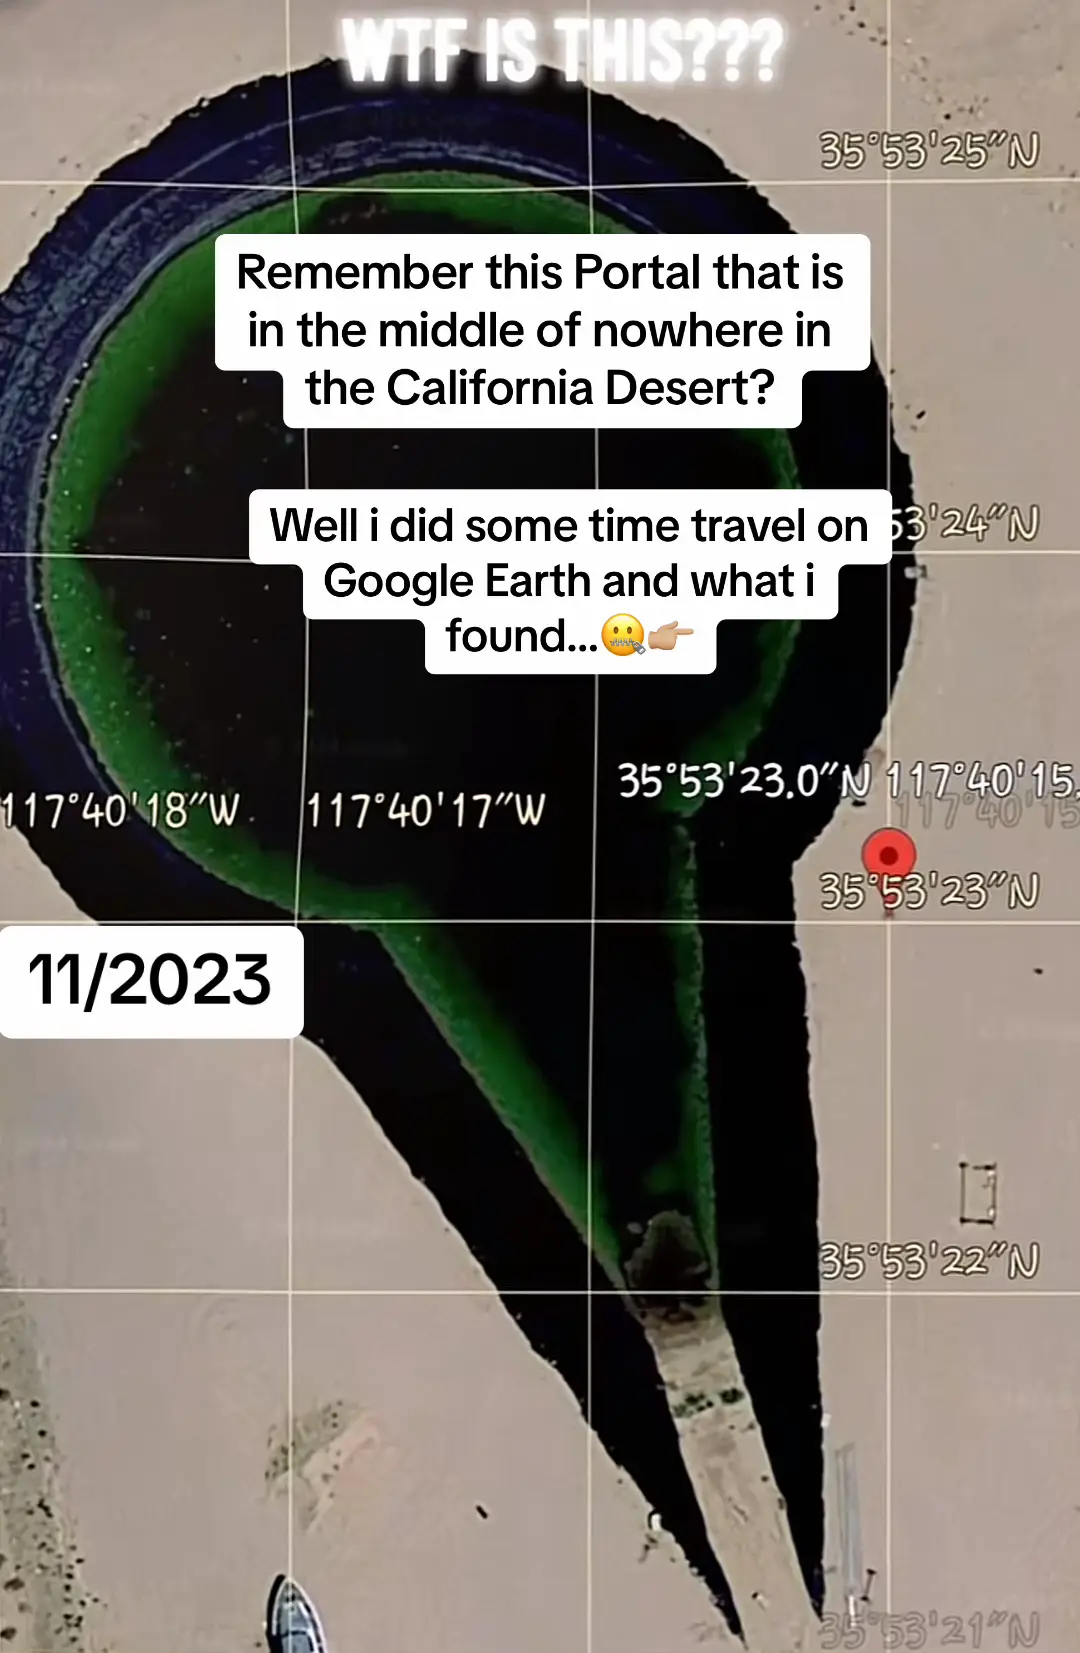 Discover with me the mysterious “portal” in California's desert on Google Earth Coordinates 35°53’24 N 117°40’16 W. Swipe to witness its evolution over the years! #PortalMystery #California  #alien 